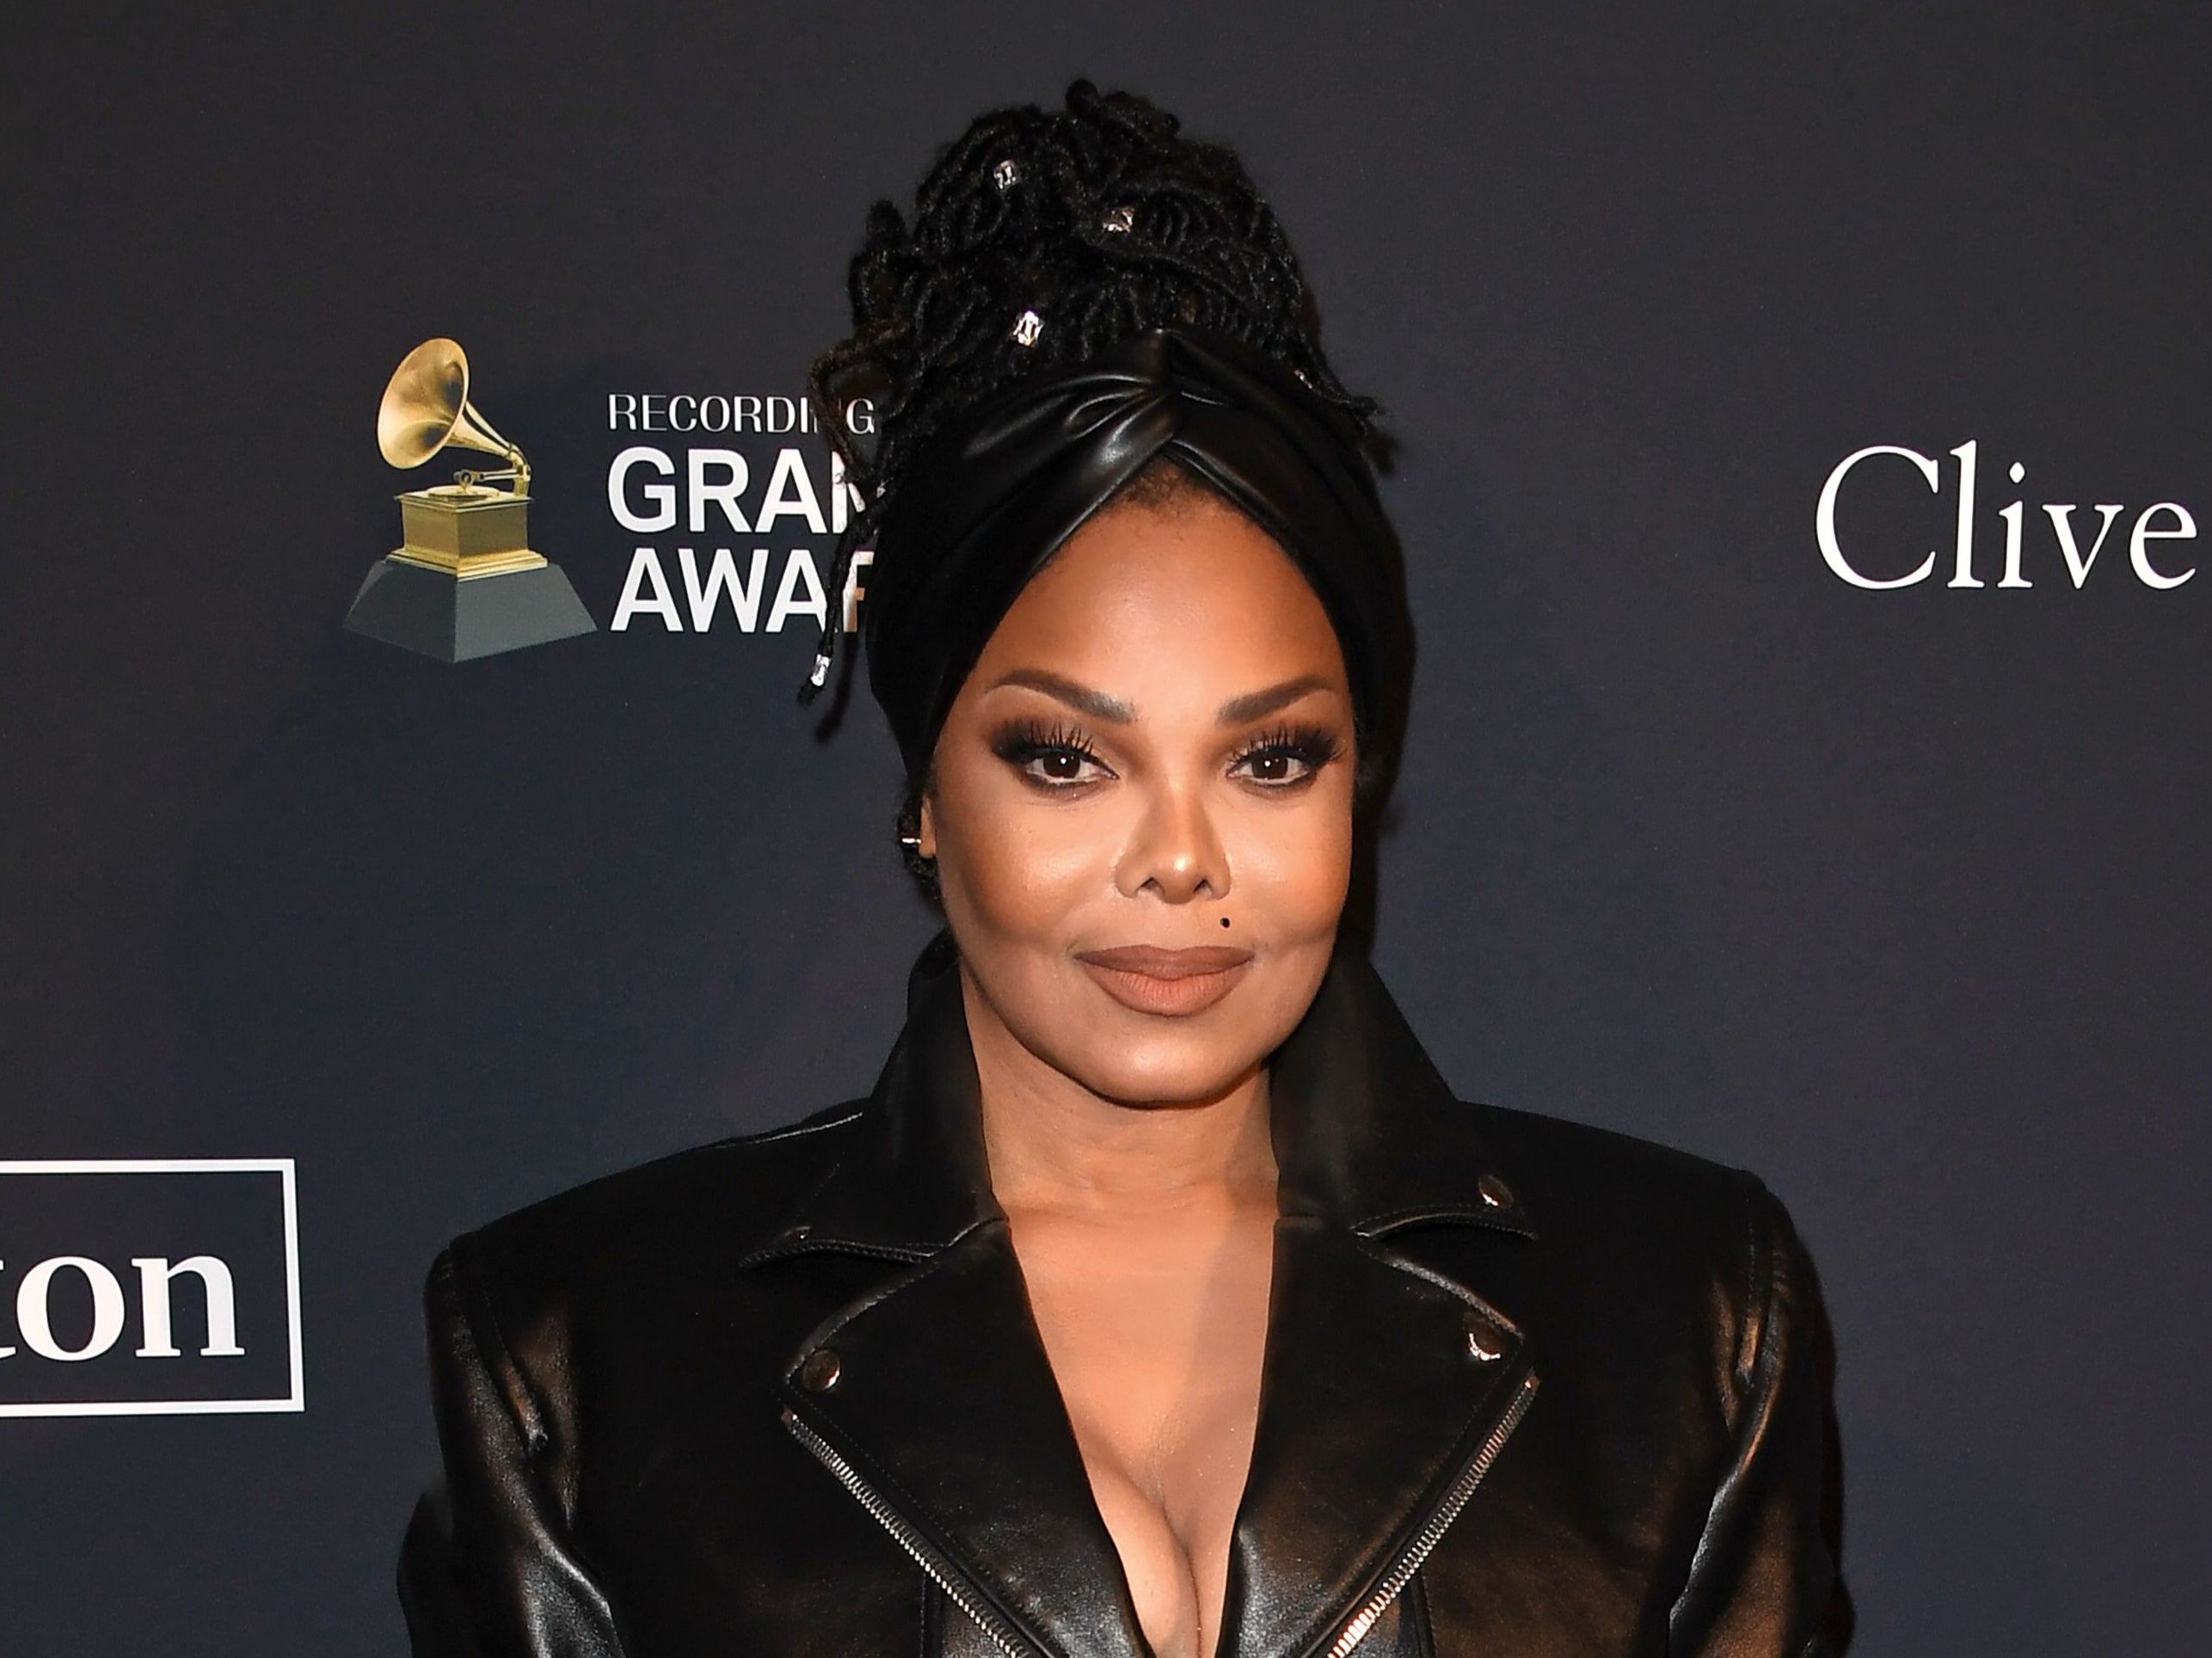 Janet Jackson attends the Recording Academy and Clive Davis pre-Grammy gala, 2020